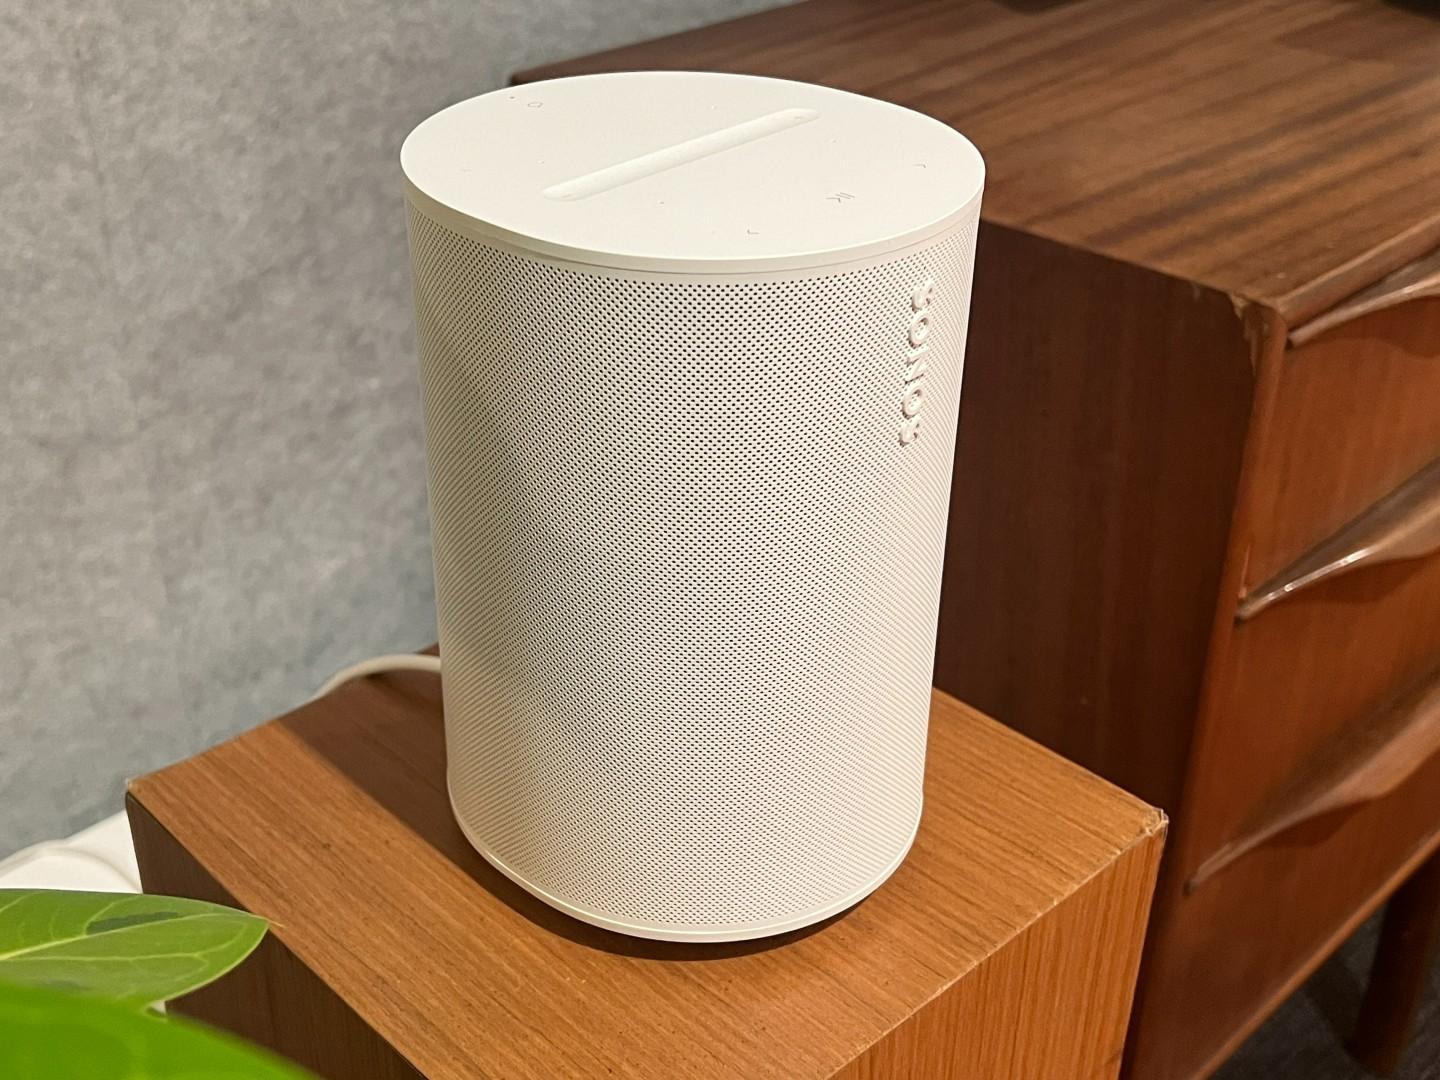 The white Sonos Era 100 smart speaker sits on a light wooden stand in a demo room.